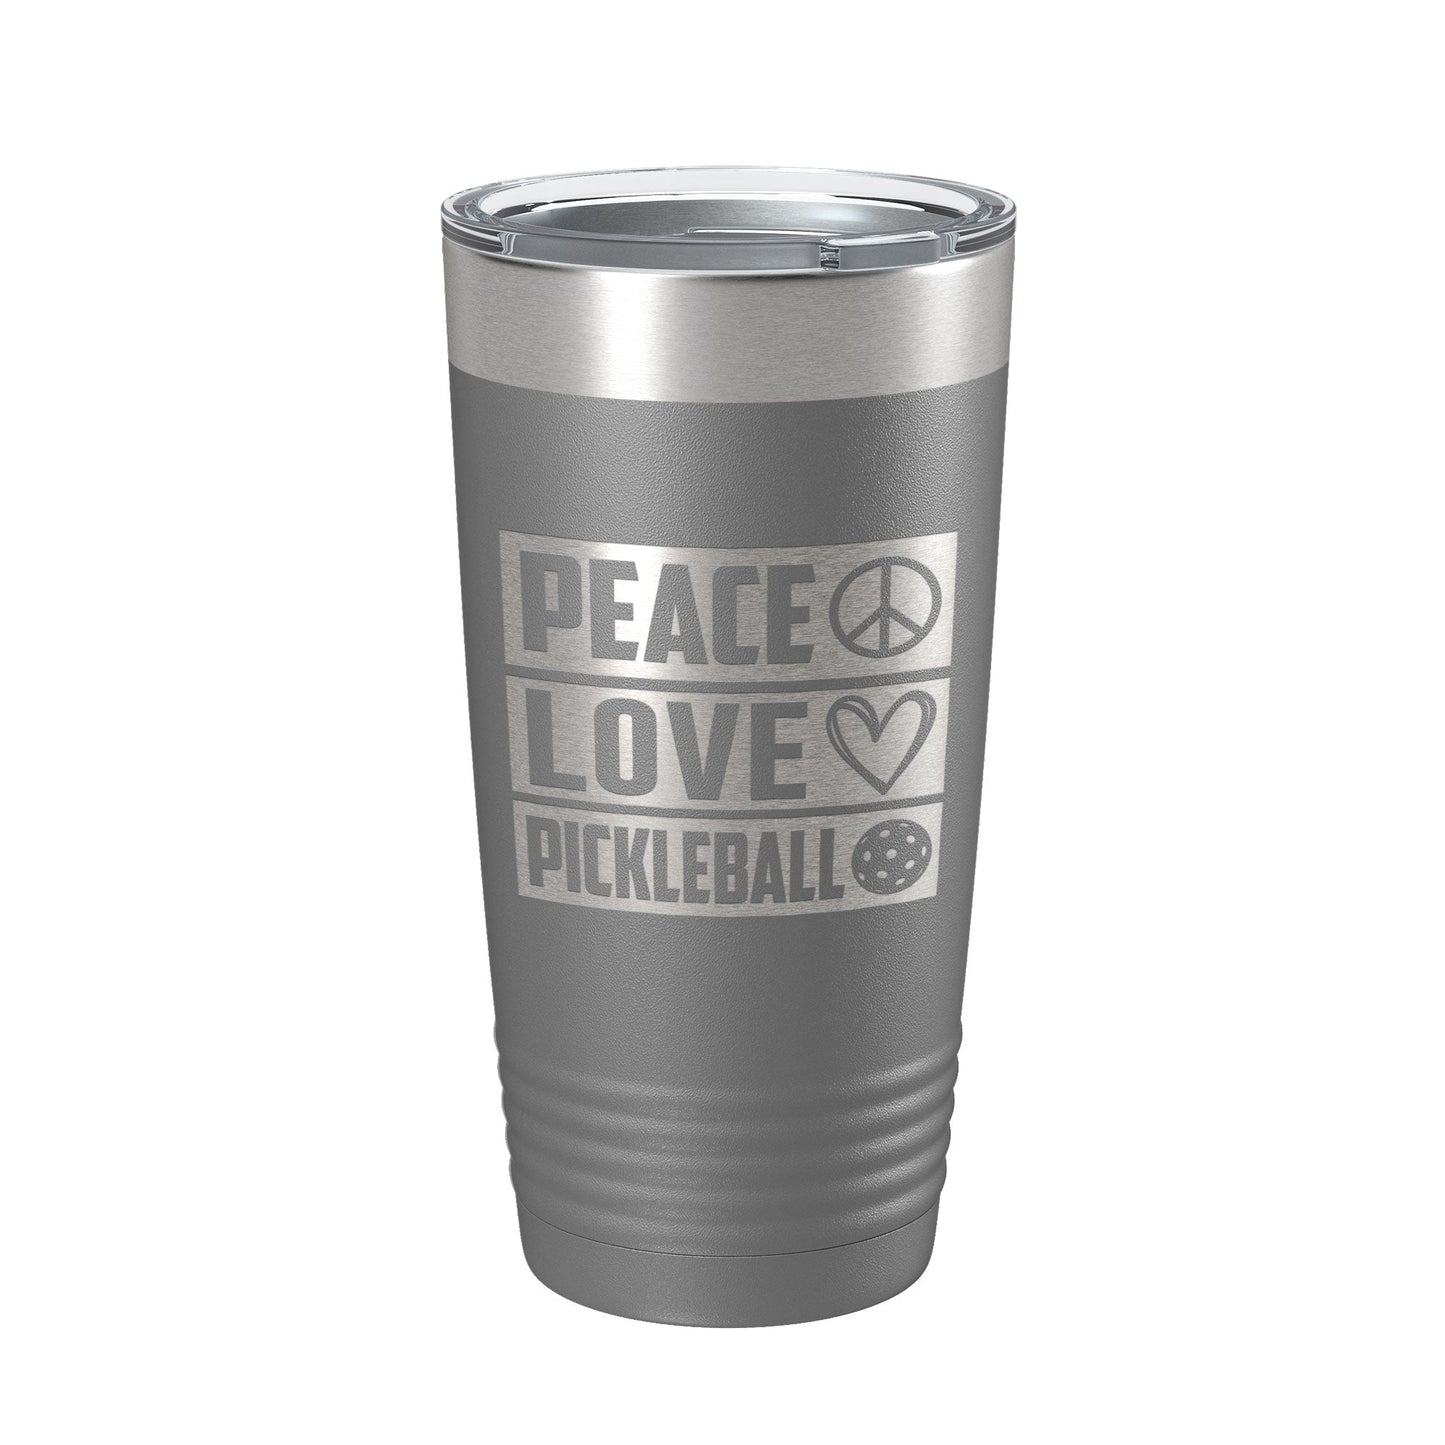 Peace Love Pickleball Tumbler Travel Mug Insulated Laser Engraved Coffee Cup Pickle Ball Gift 20 oz-16